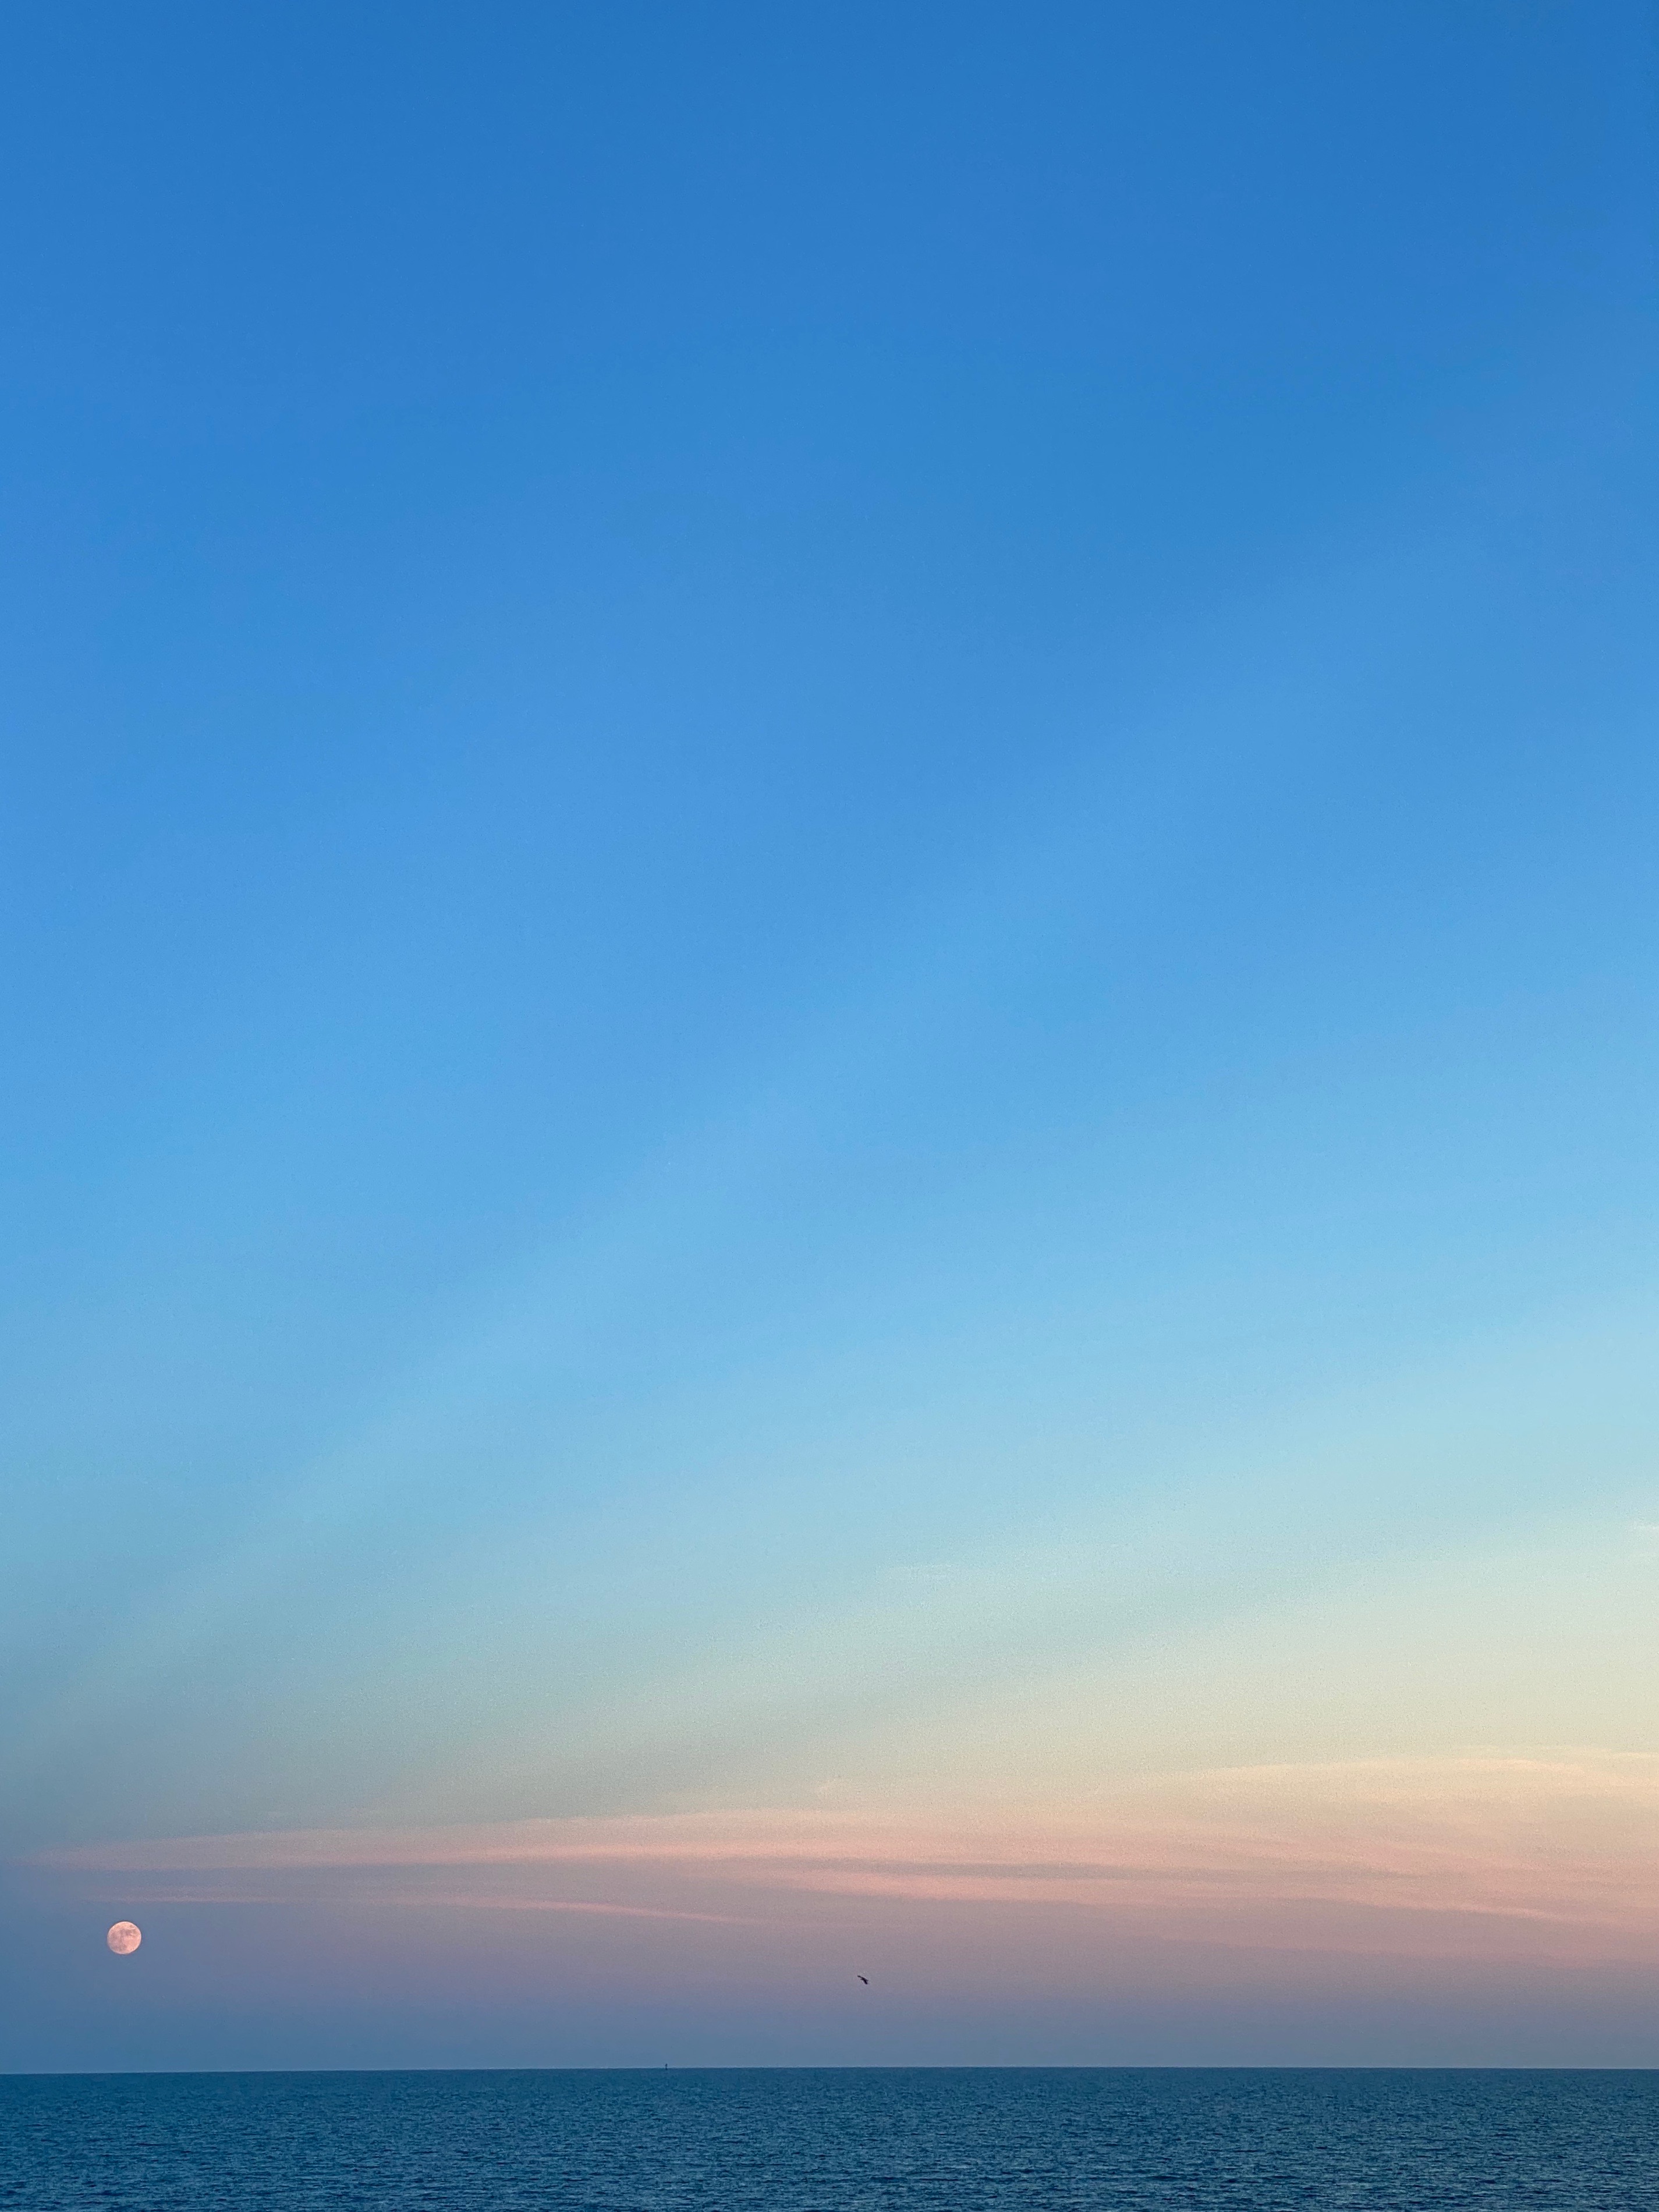 The Moon hangs low over the ocean against a blue and pink sunset sky